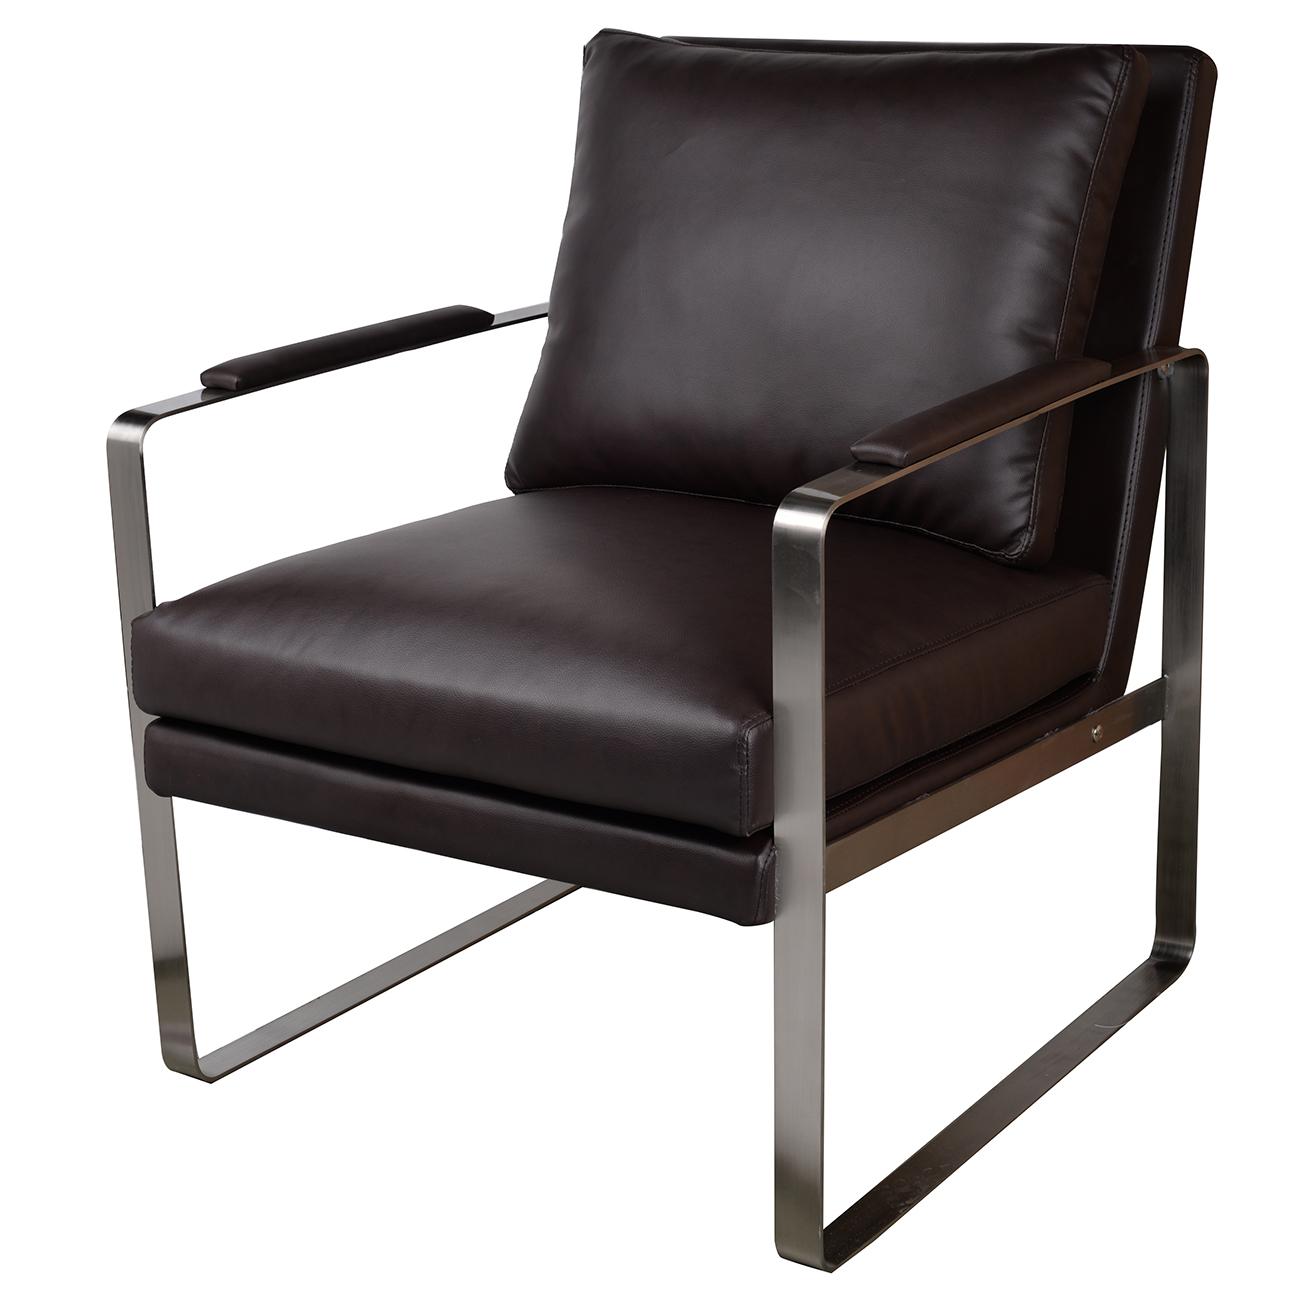 Contemporary Arm Chairs 41017 41017-Armchair in Dark Brown Leather